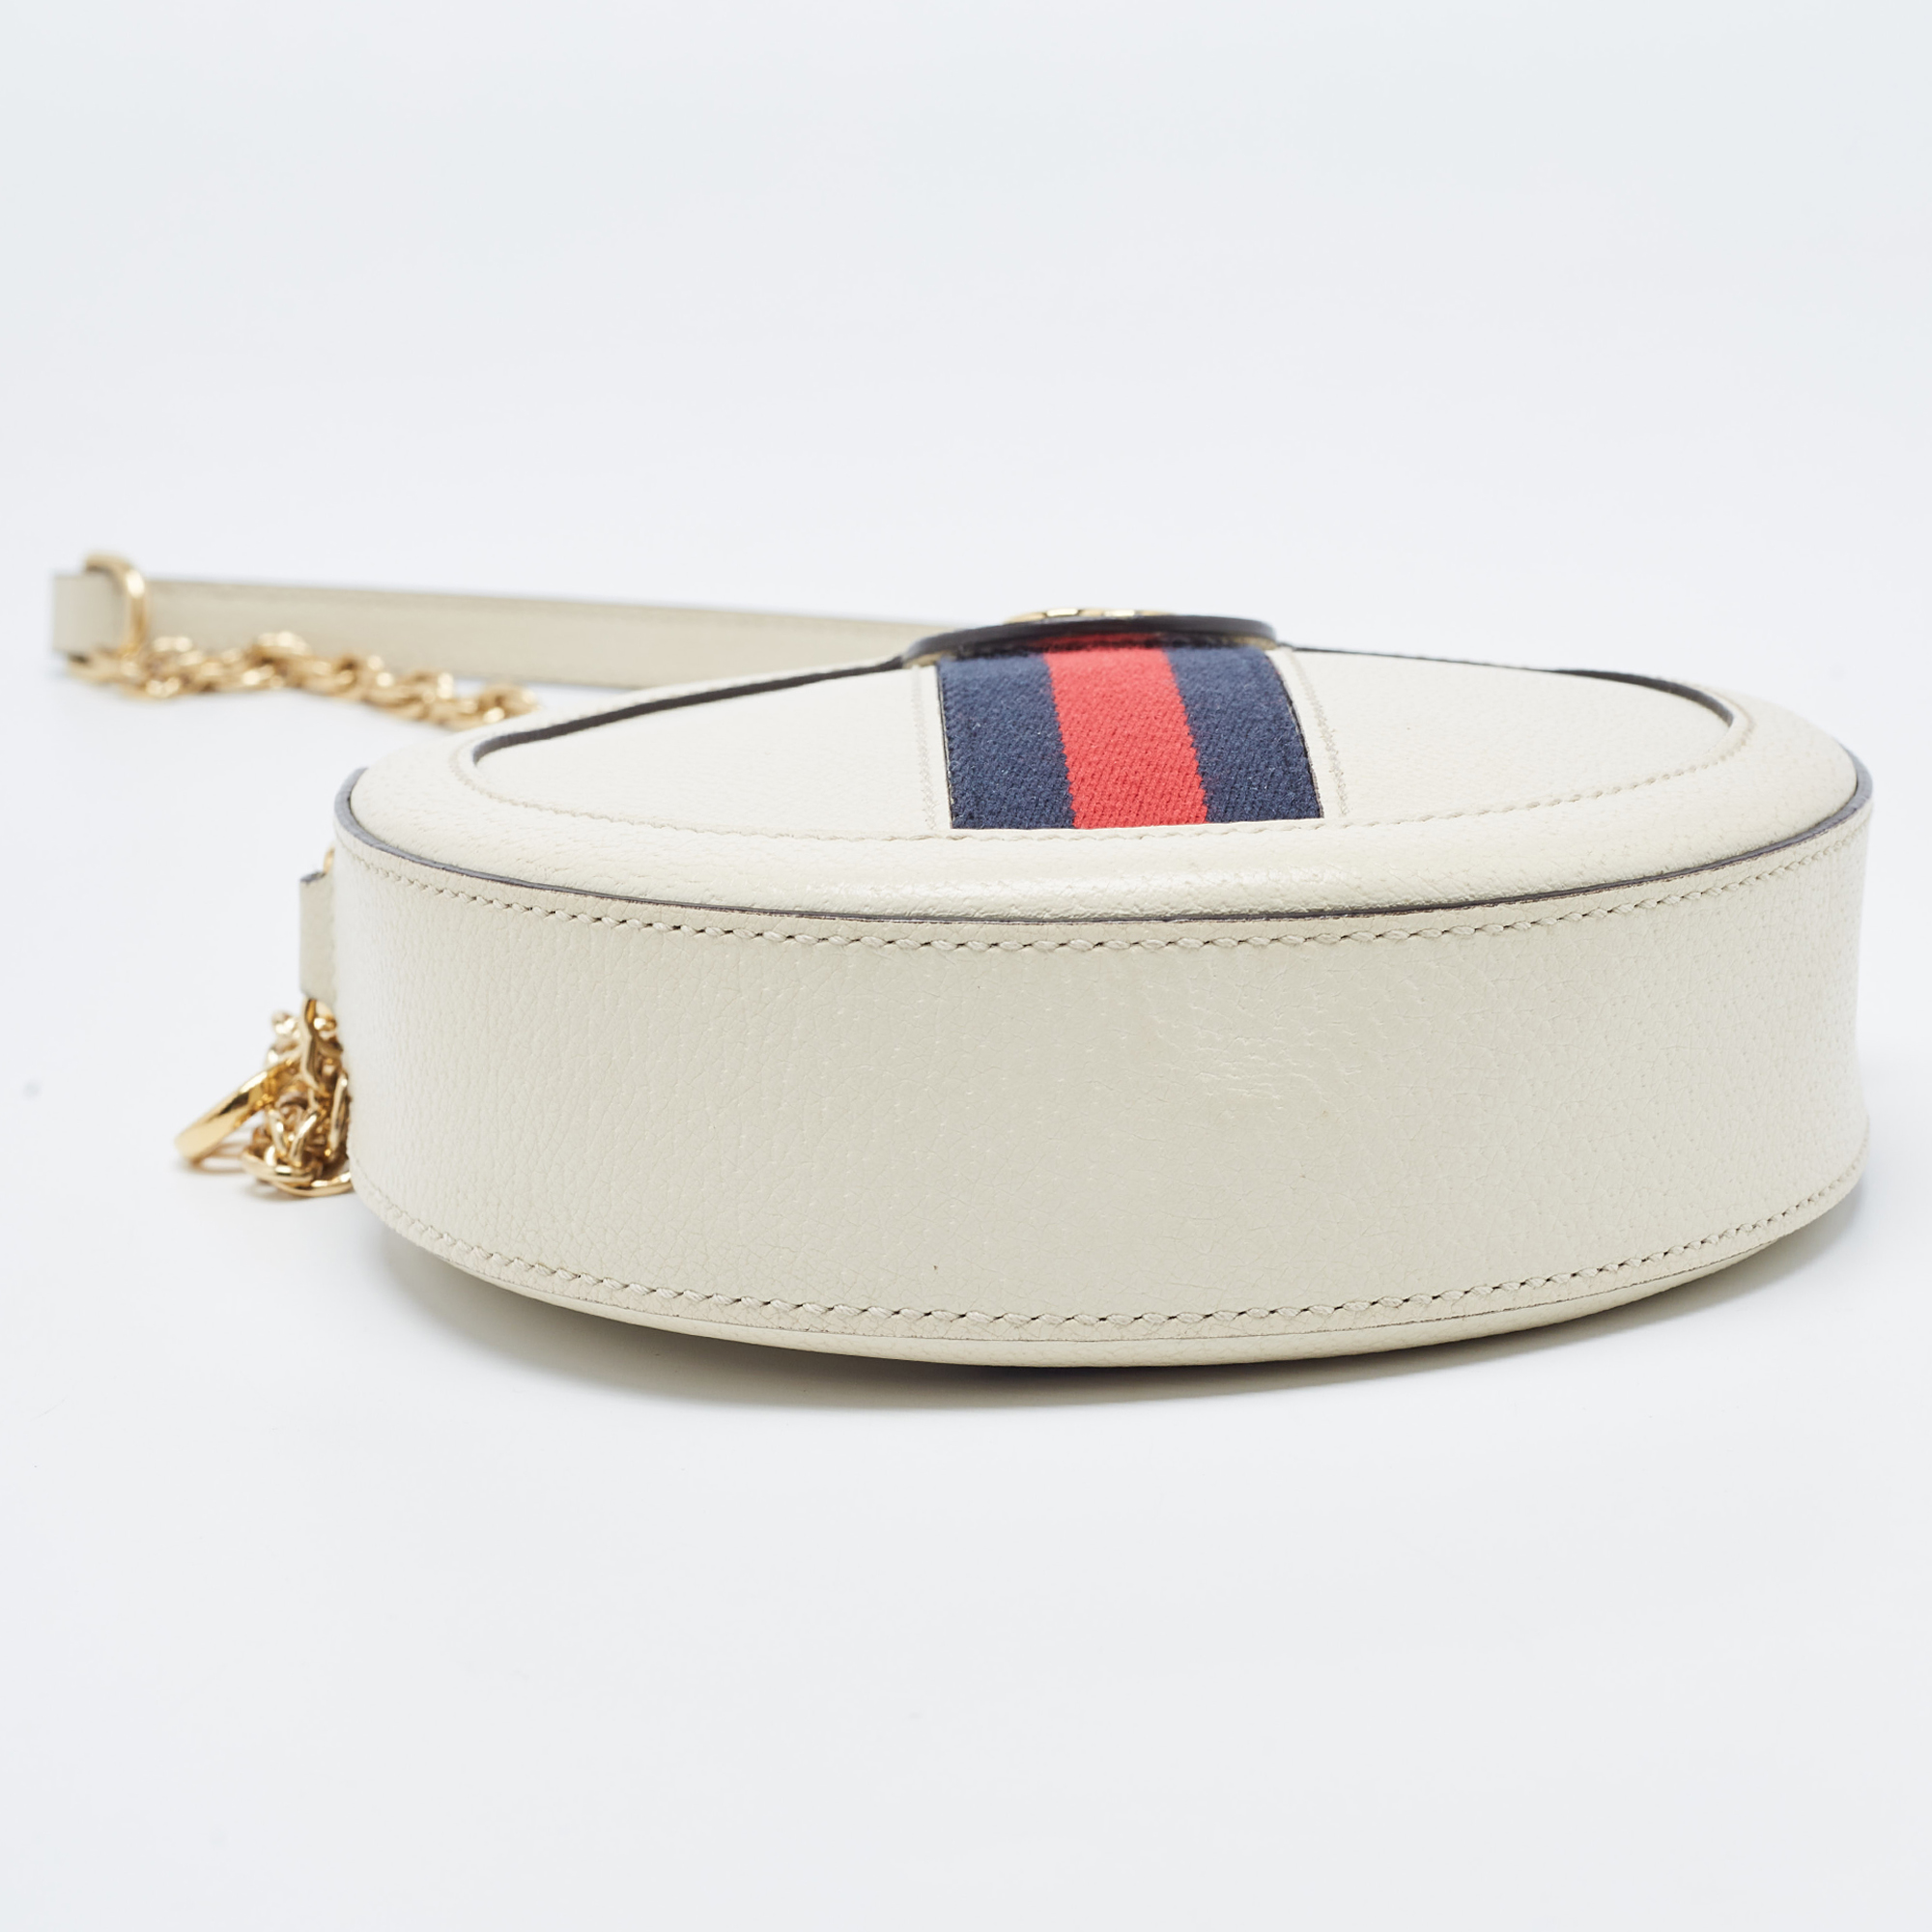 Gucci Off White Leather Mini Ophidia Round Shoulder Bag